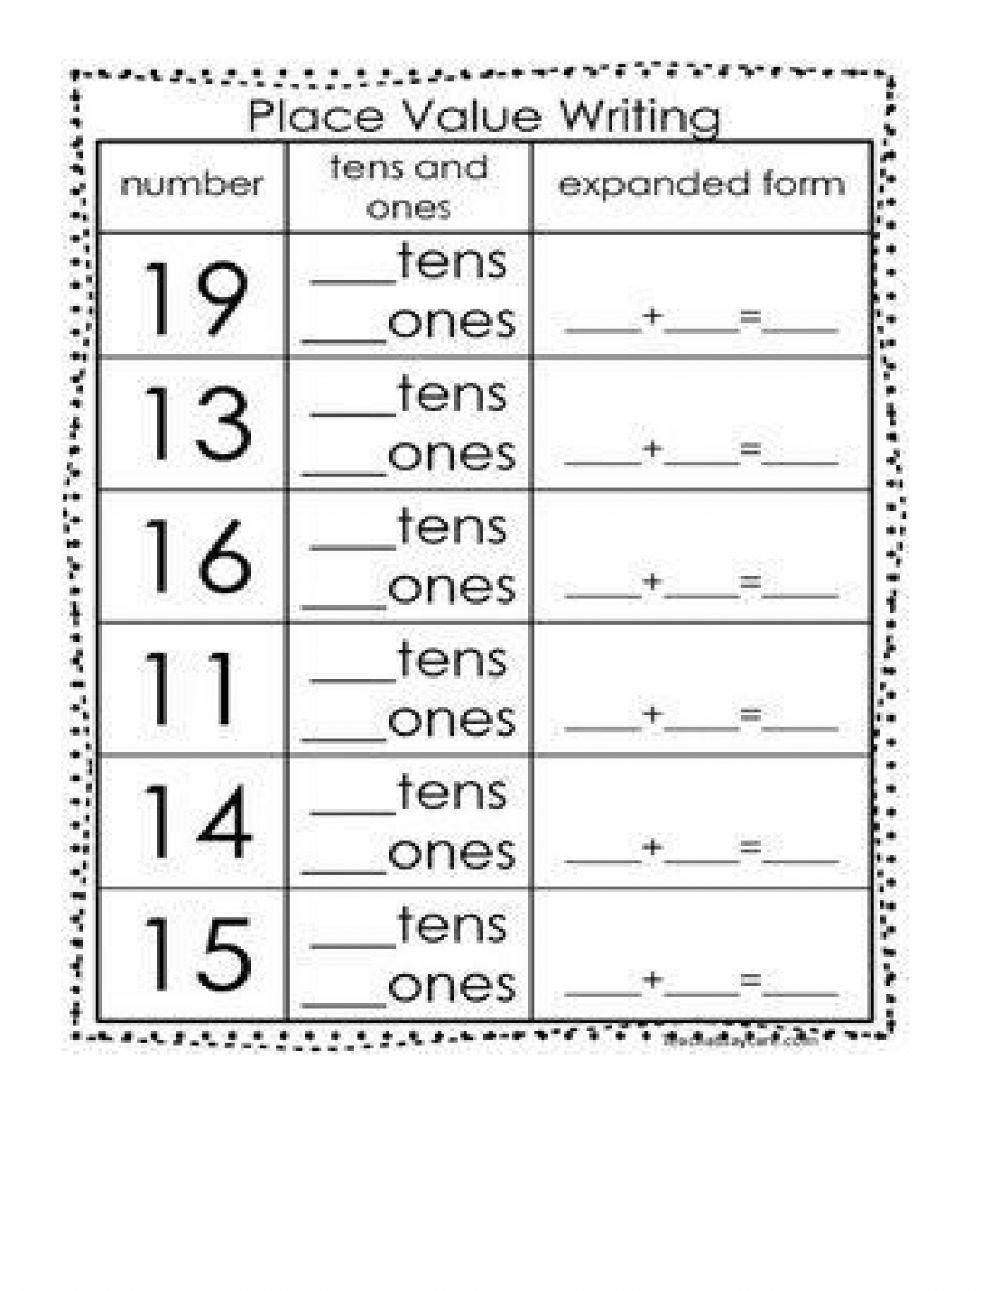 Place Value (Tens and Ones)